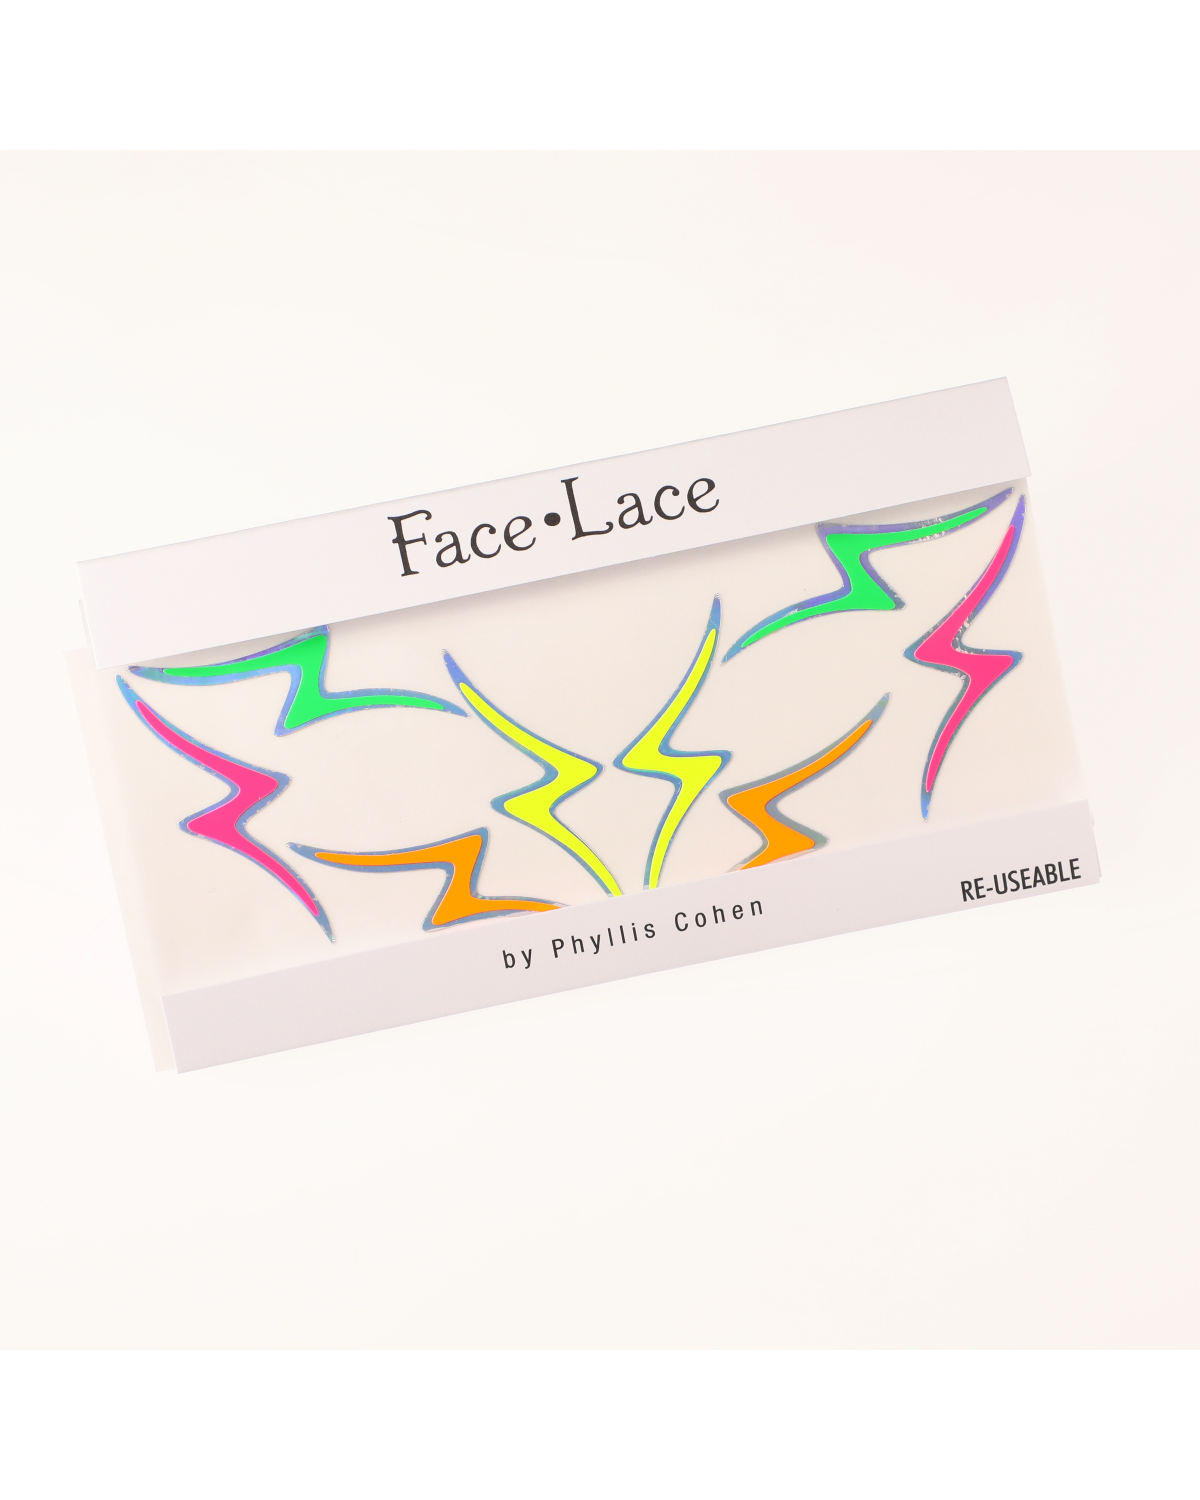 Ultra Voltage / Face Lace by Phyllis Cohen